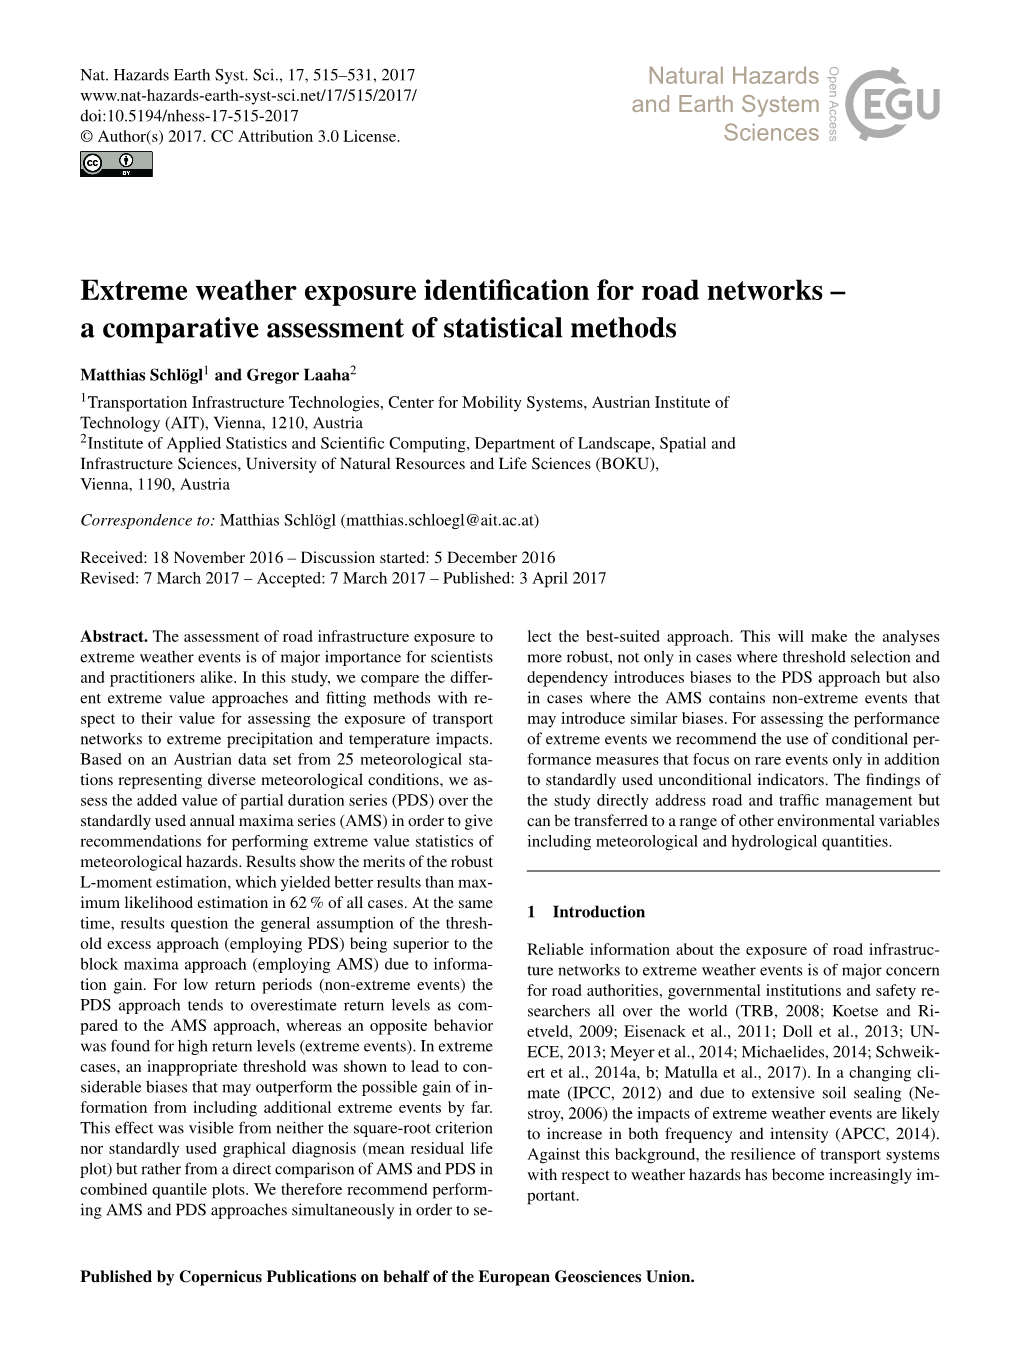 Extreme Weather Exposure Identification for Road Networks – A